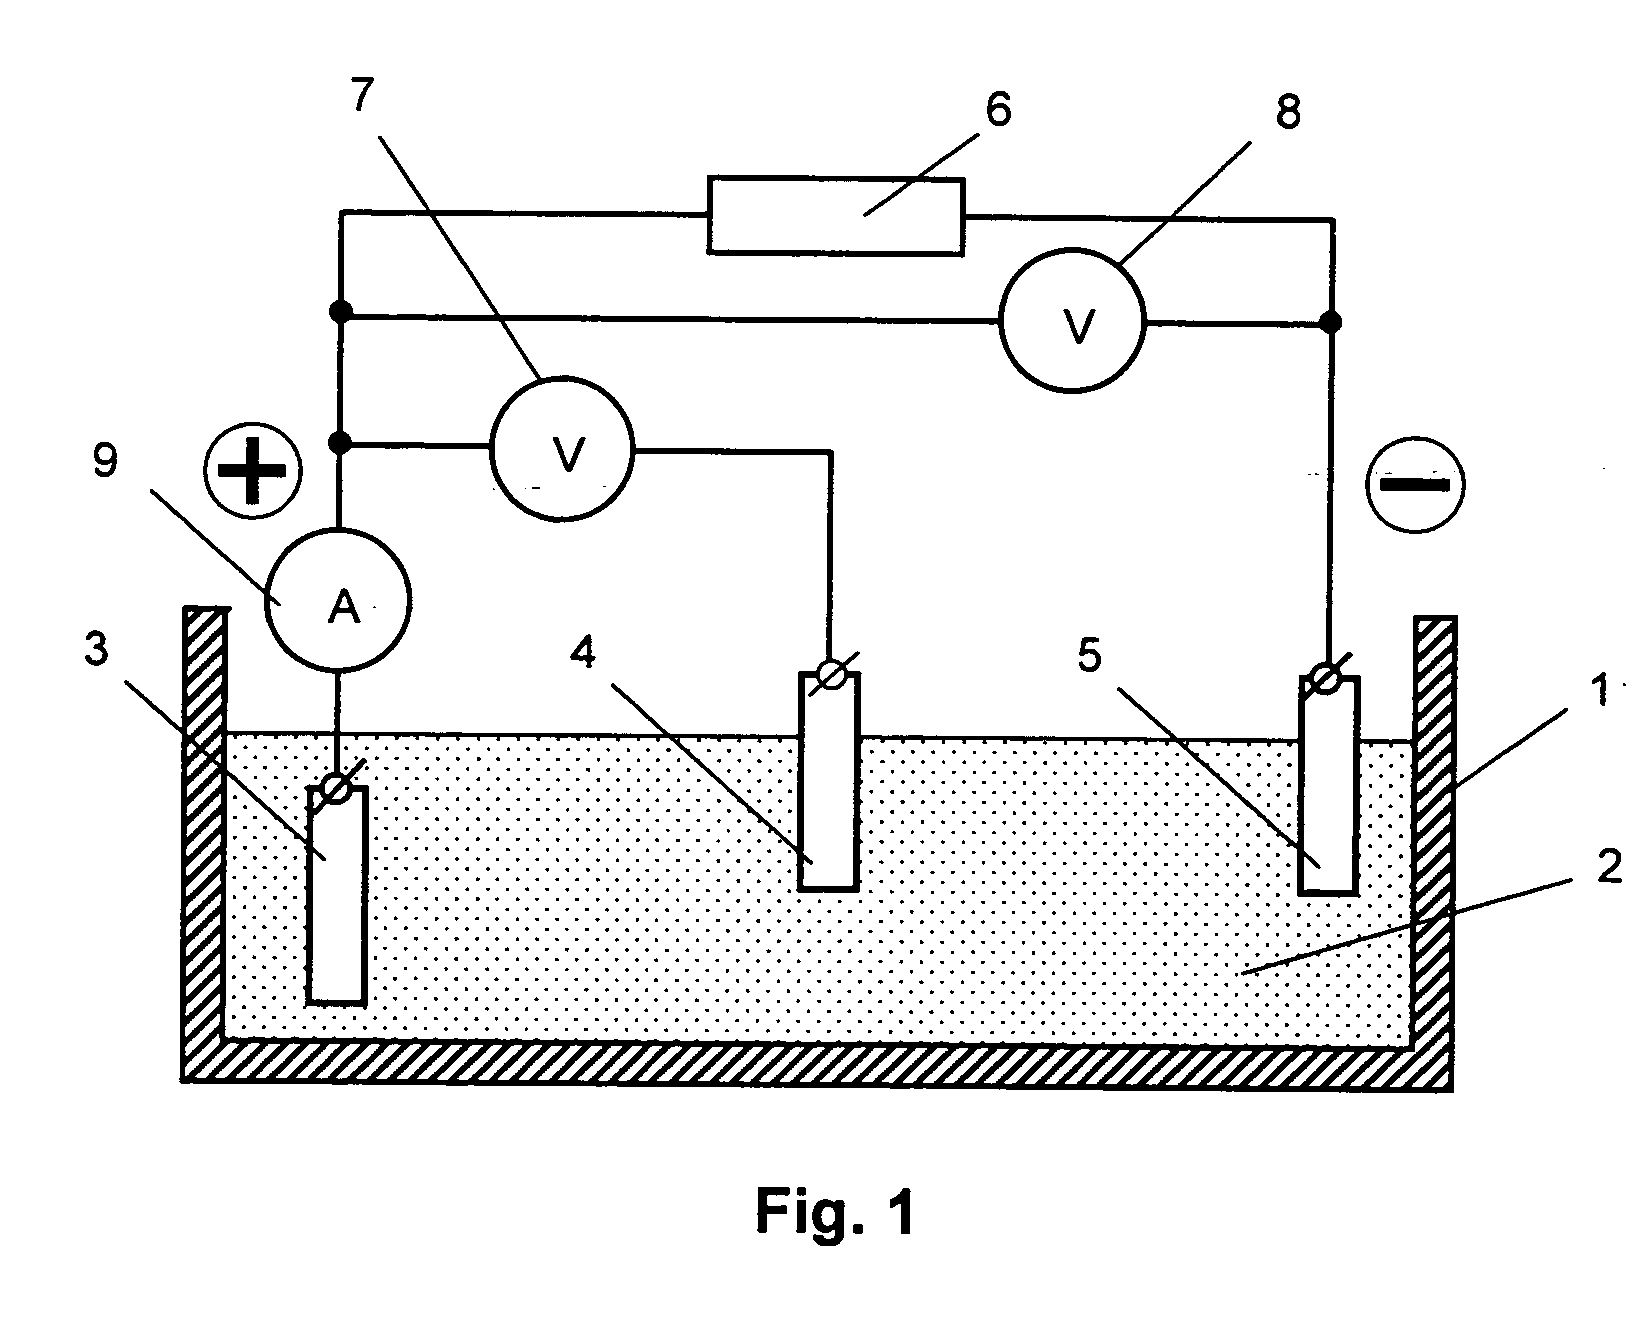 Method of manufacture of an electrode for electrochemical devices